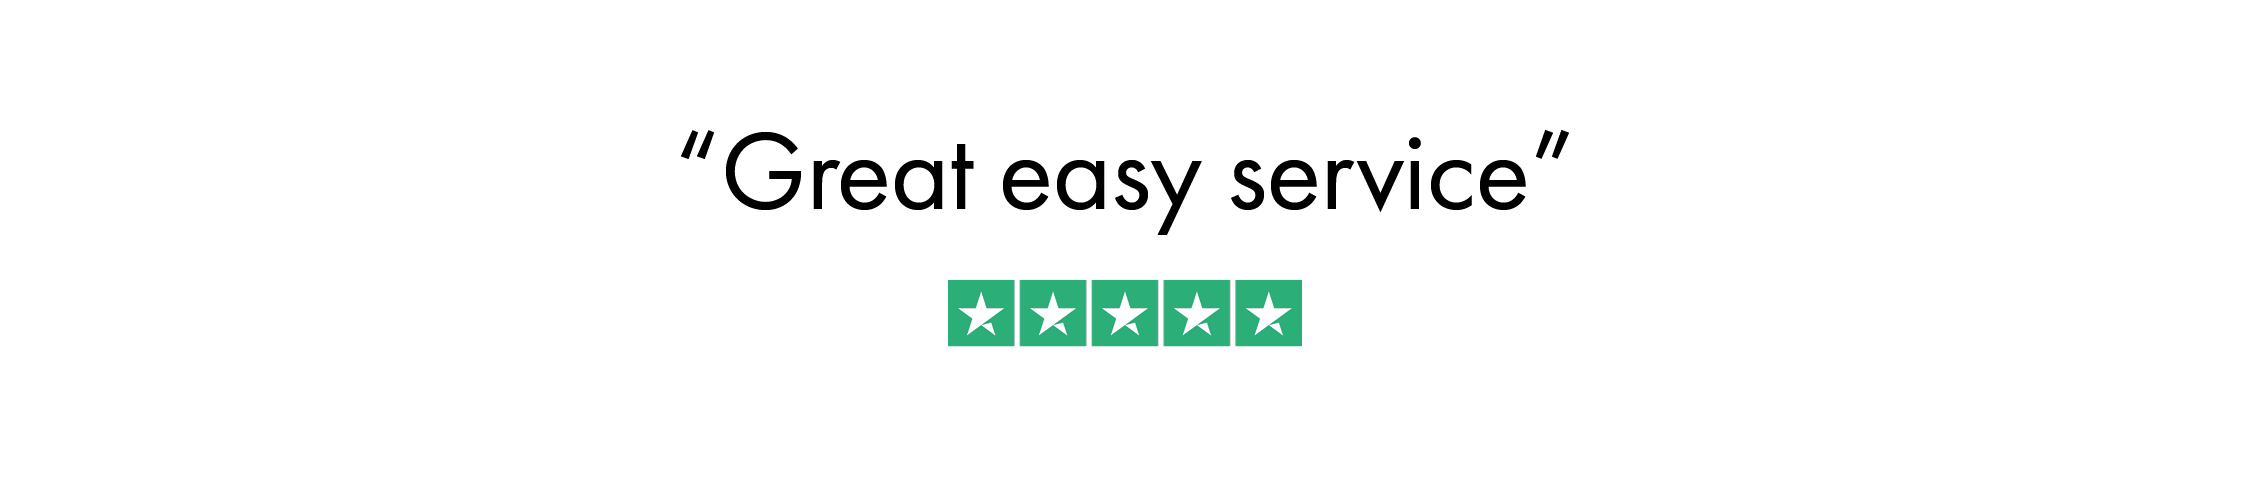 Great Easy Service Trustpilot Review